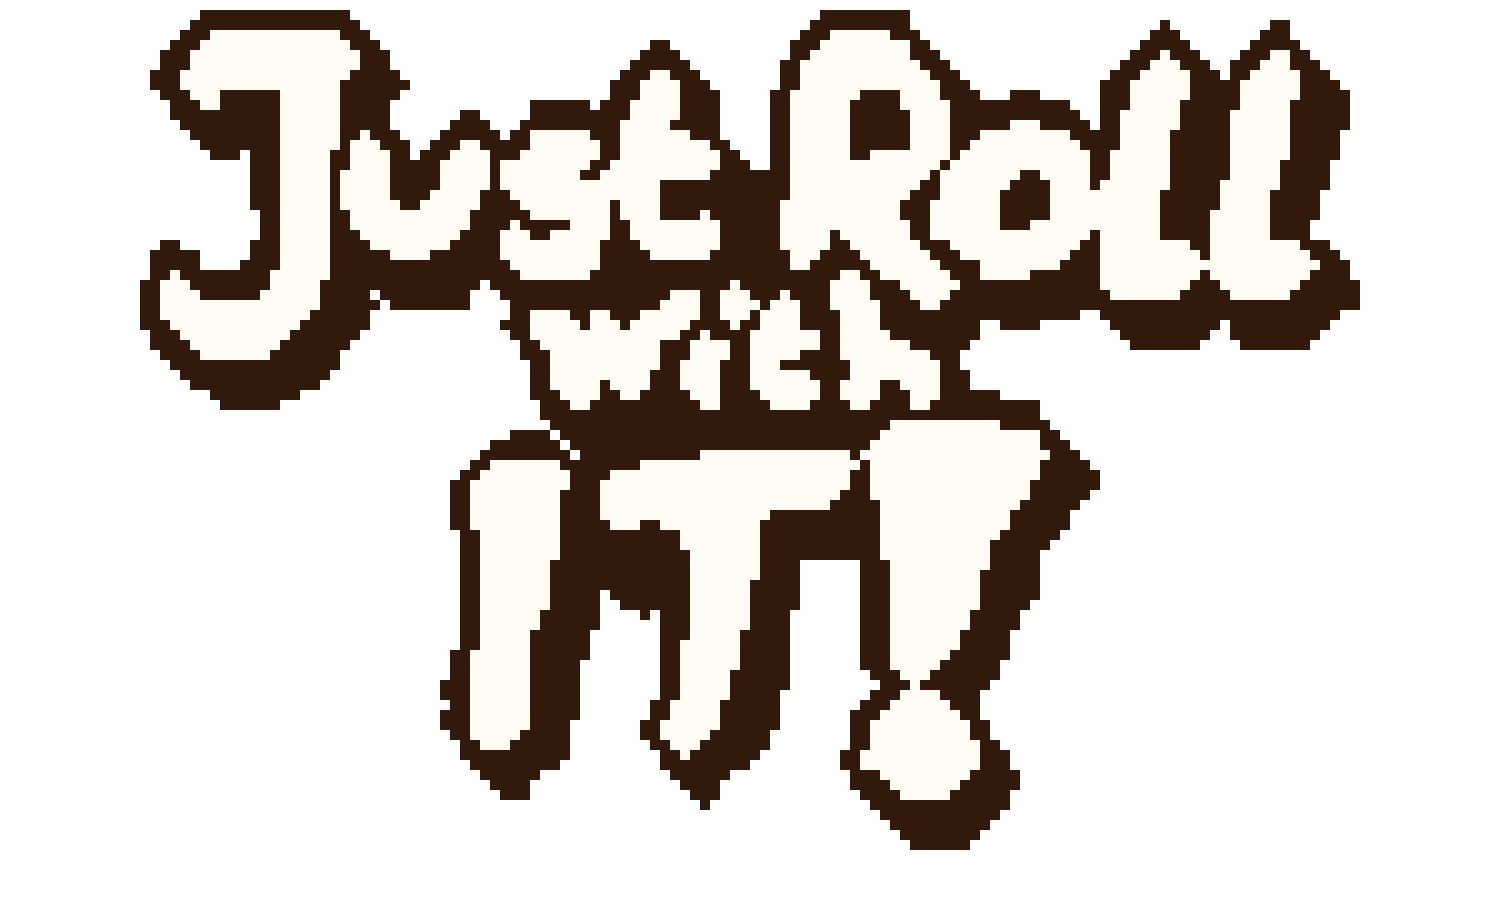 Just Roll With It!